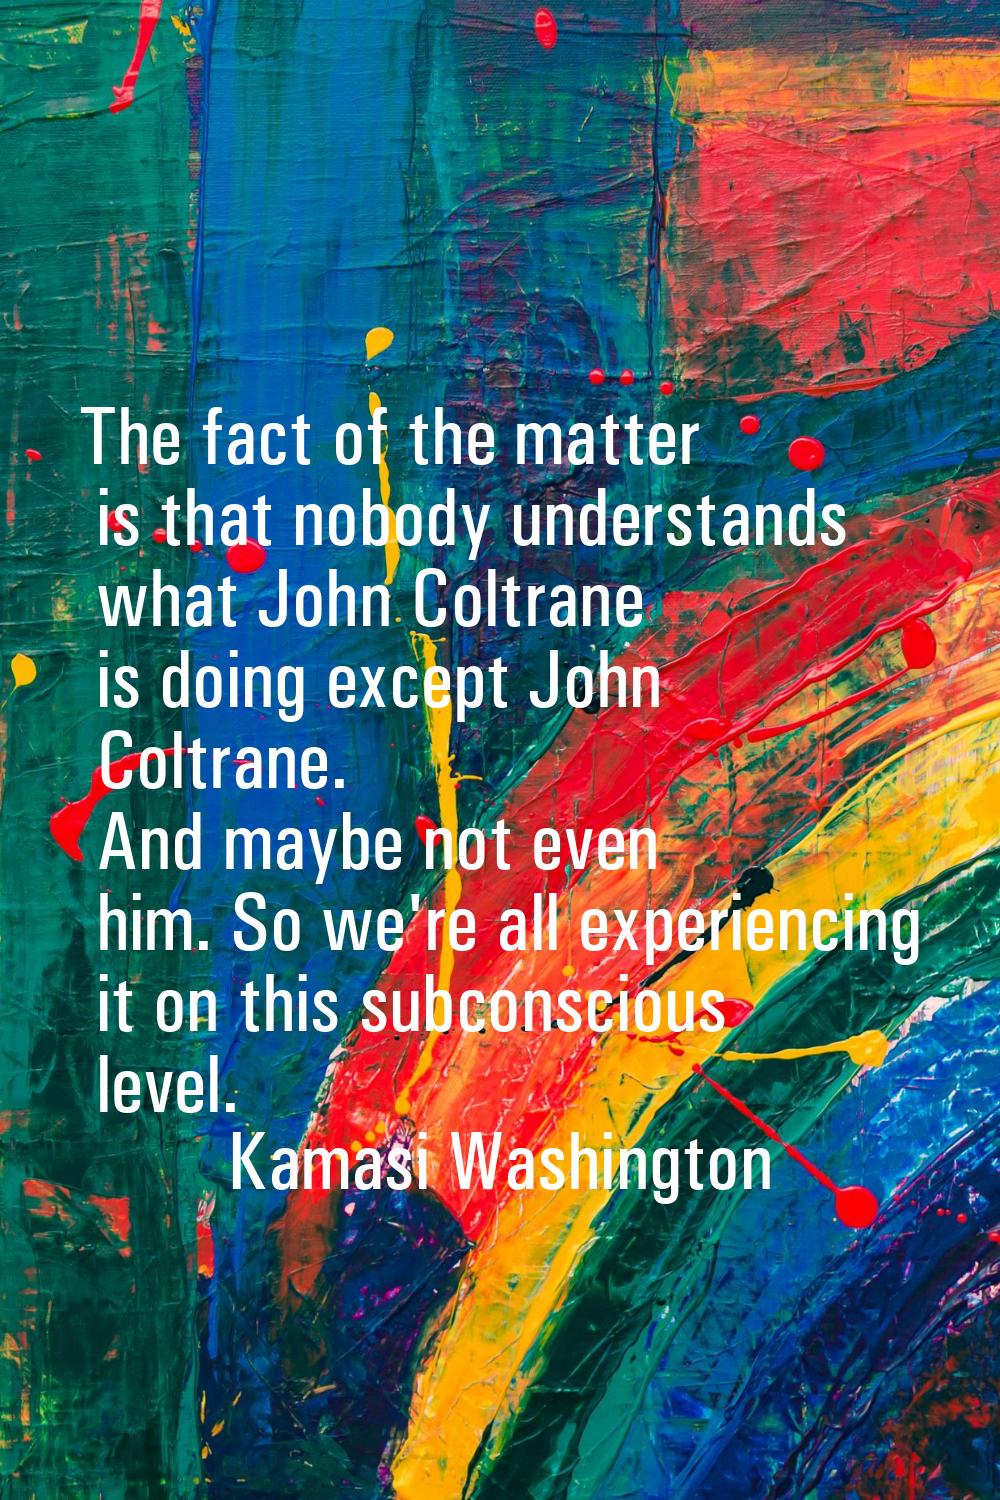 The fact of the matter is that nobody understands what John Coltrane is doing except John Coltrane.